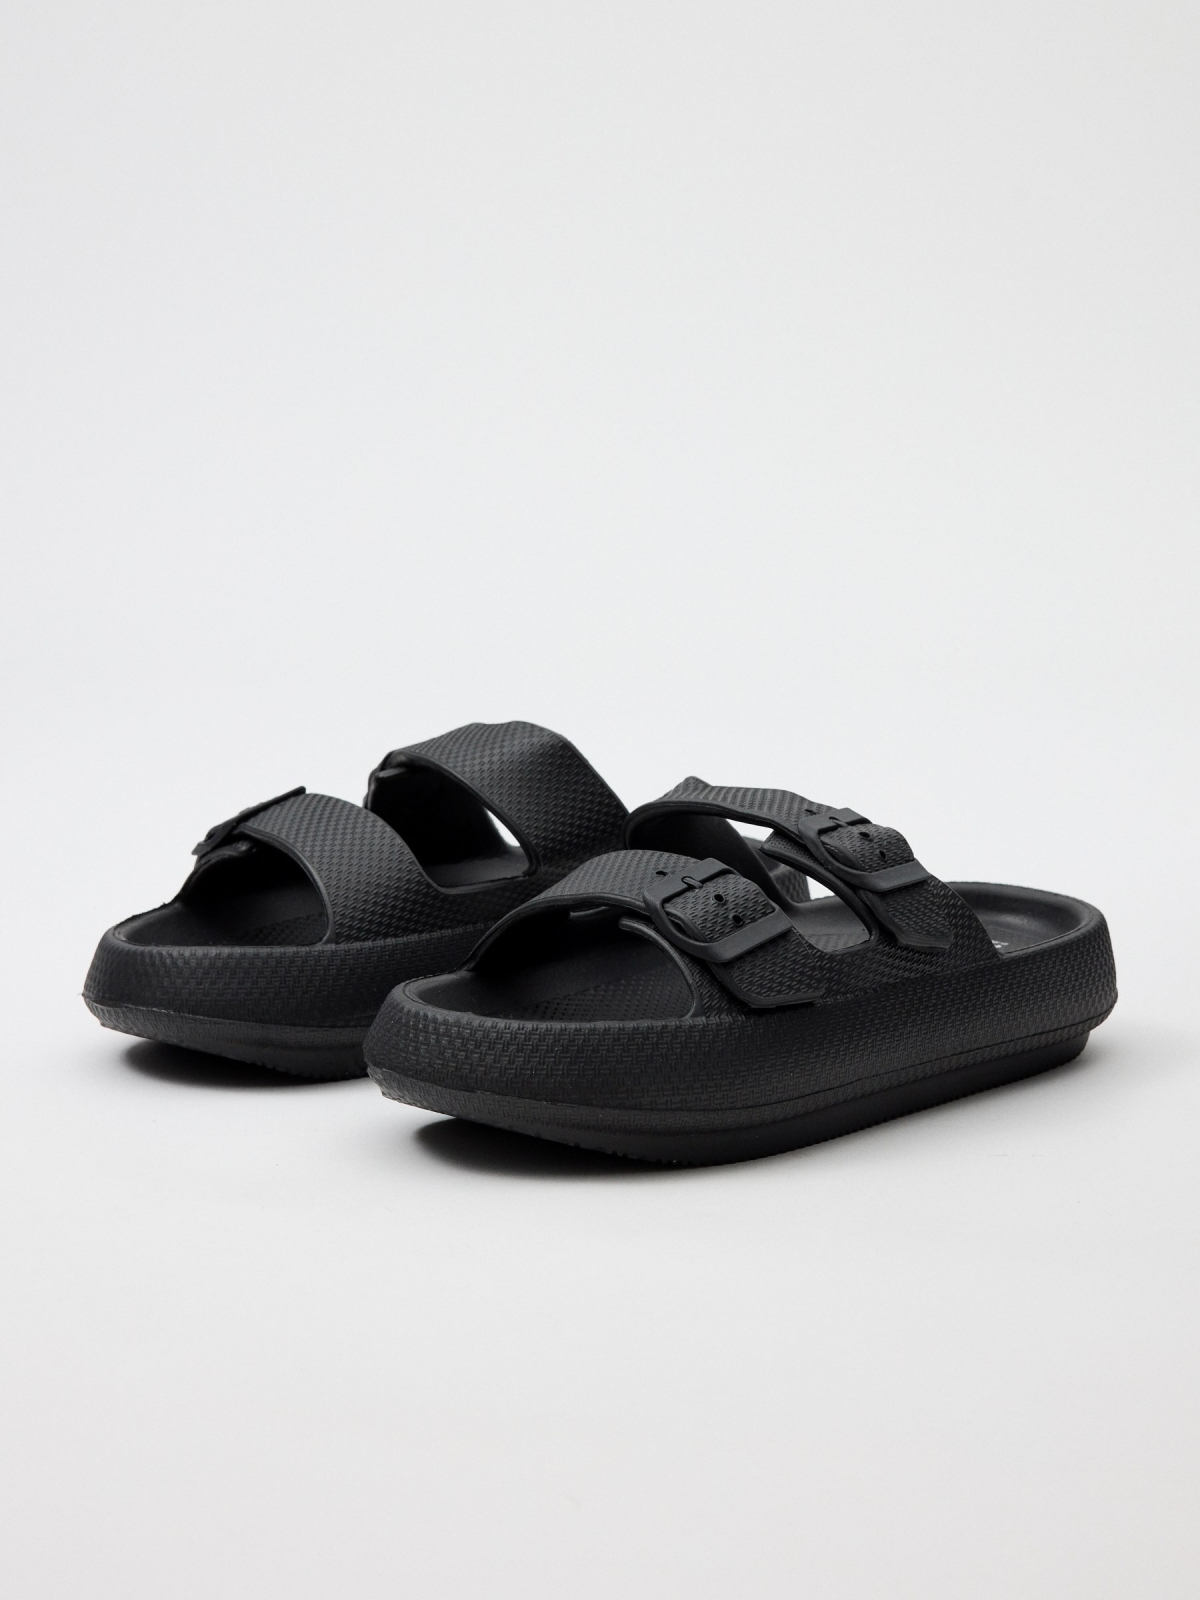 Beach flip flops with buckle fasteners black lateral view